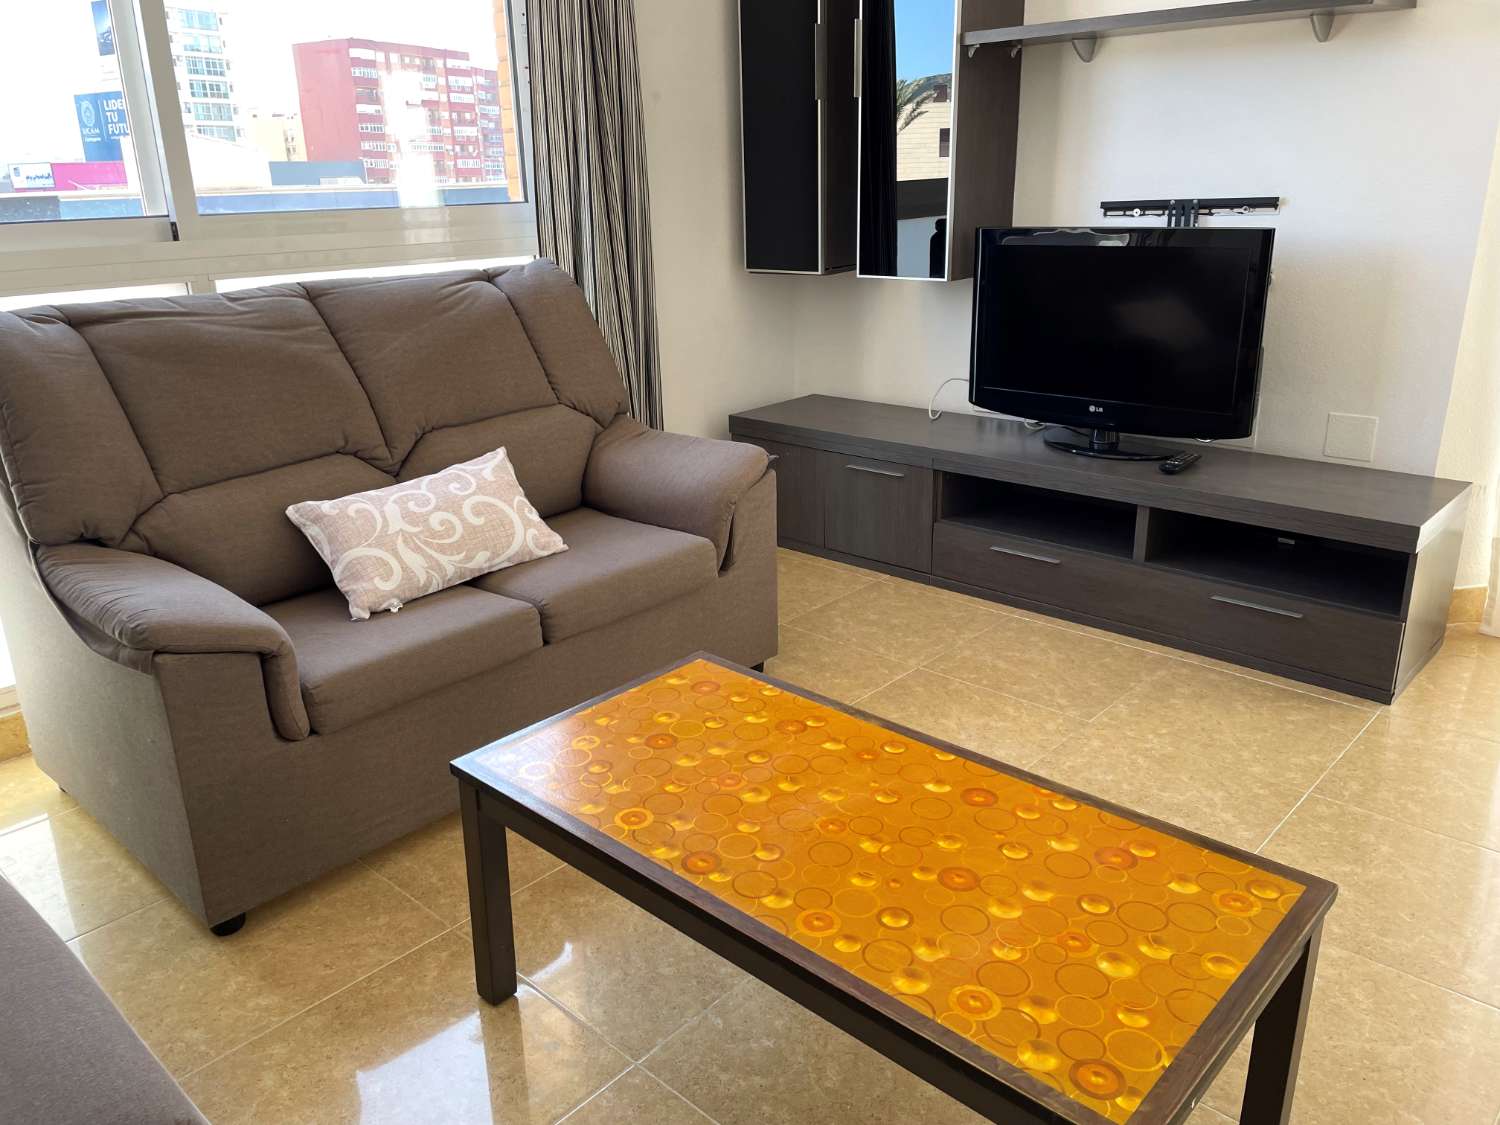 SPACIOUS FURNISHED APARTMENT AND GARAGE